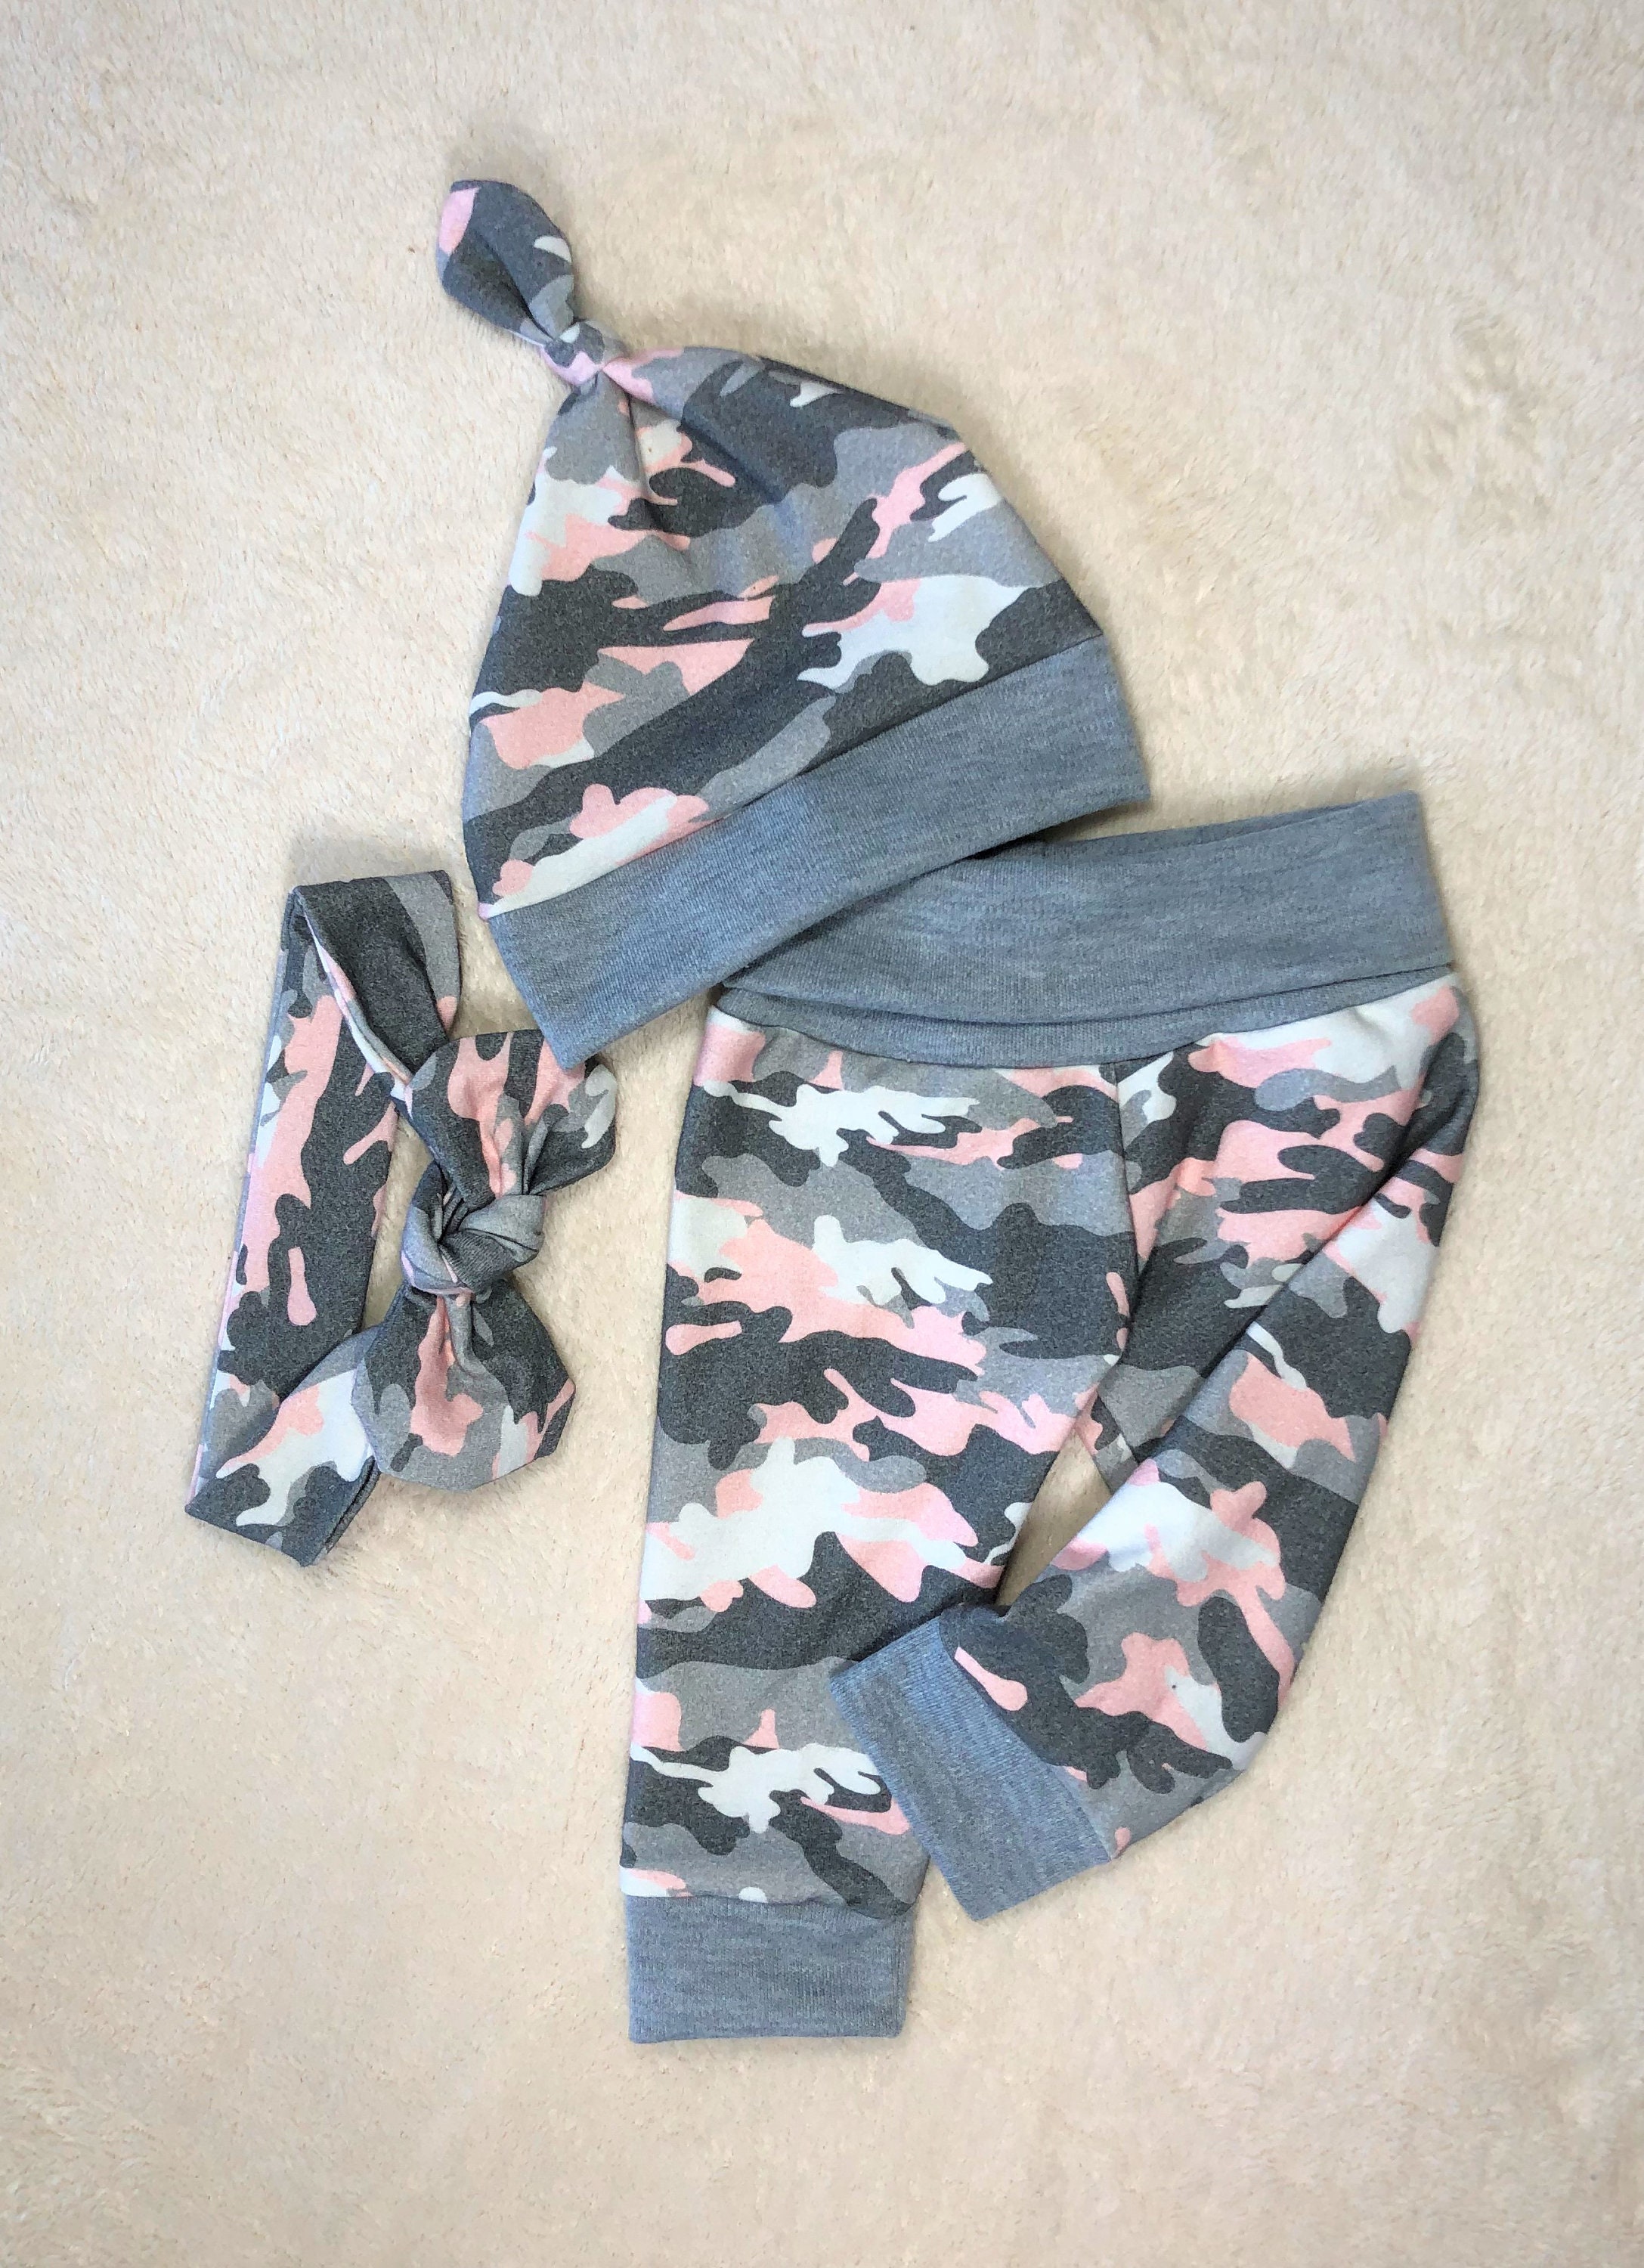 Wild Fable Pink Desert Camo High-Rise Pants Camouflage Size 2 (B53)